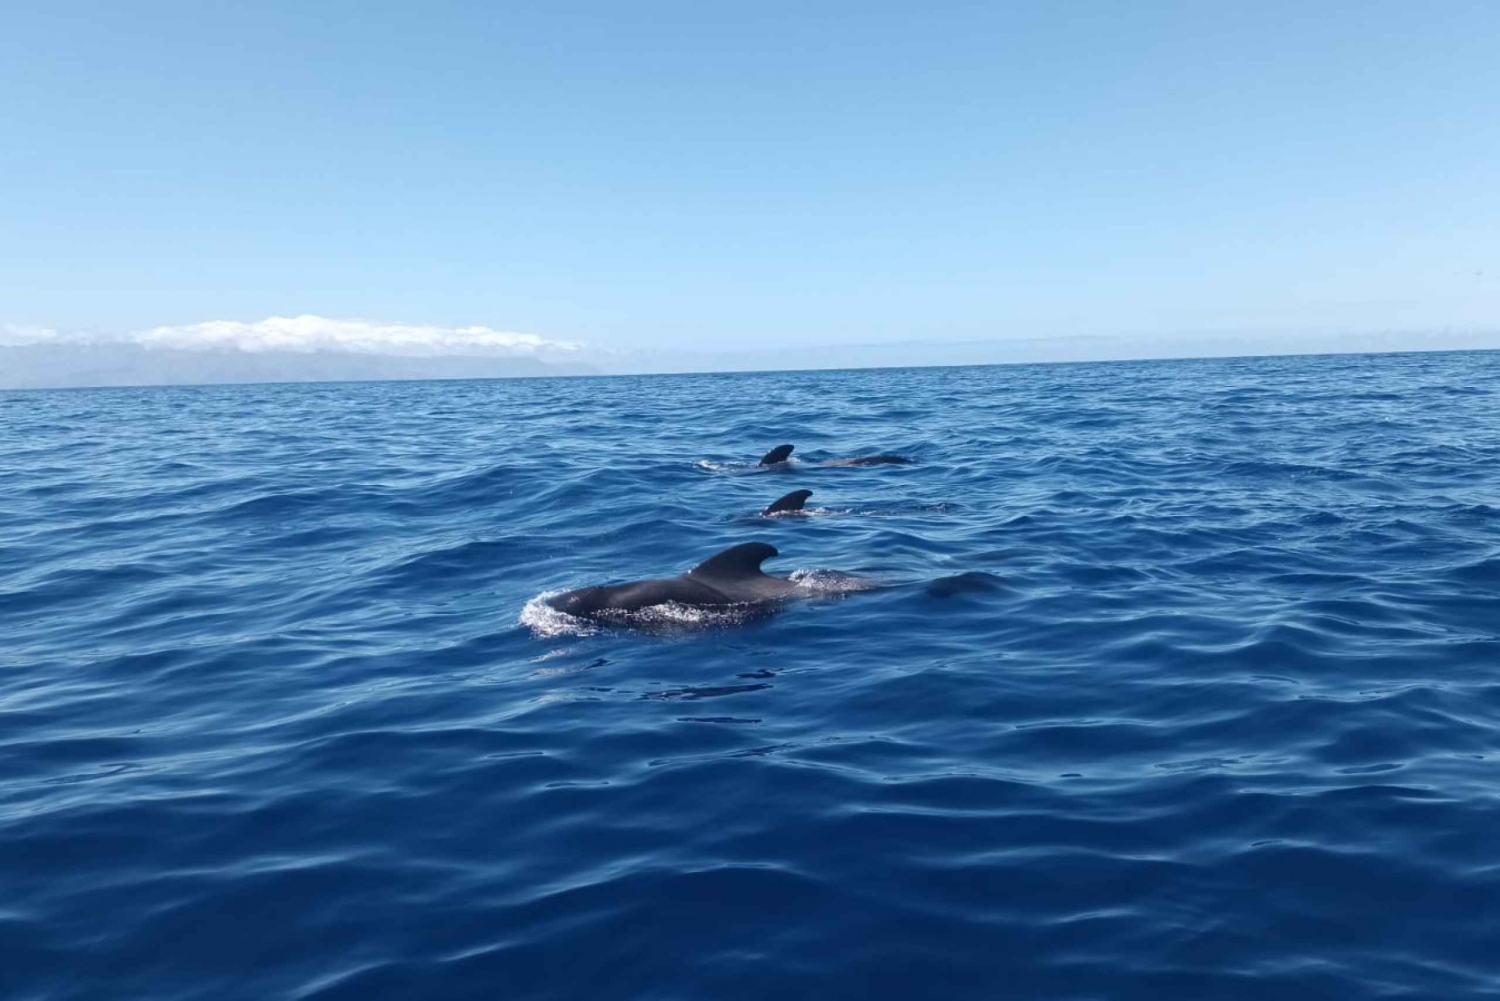 Los Gigantes : Whales and Dolphin Watching Cruise with Lunch